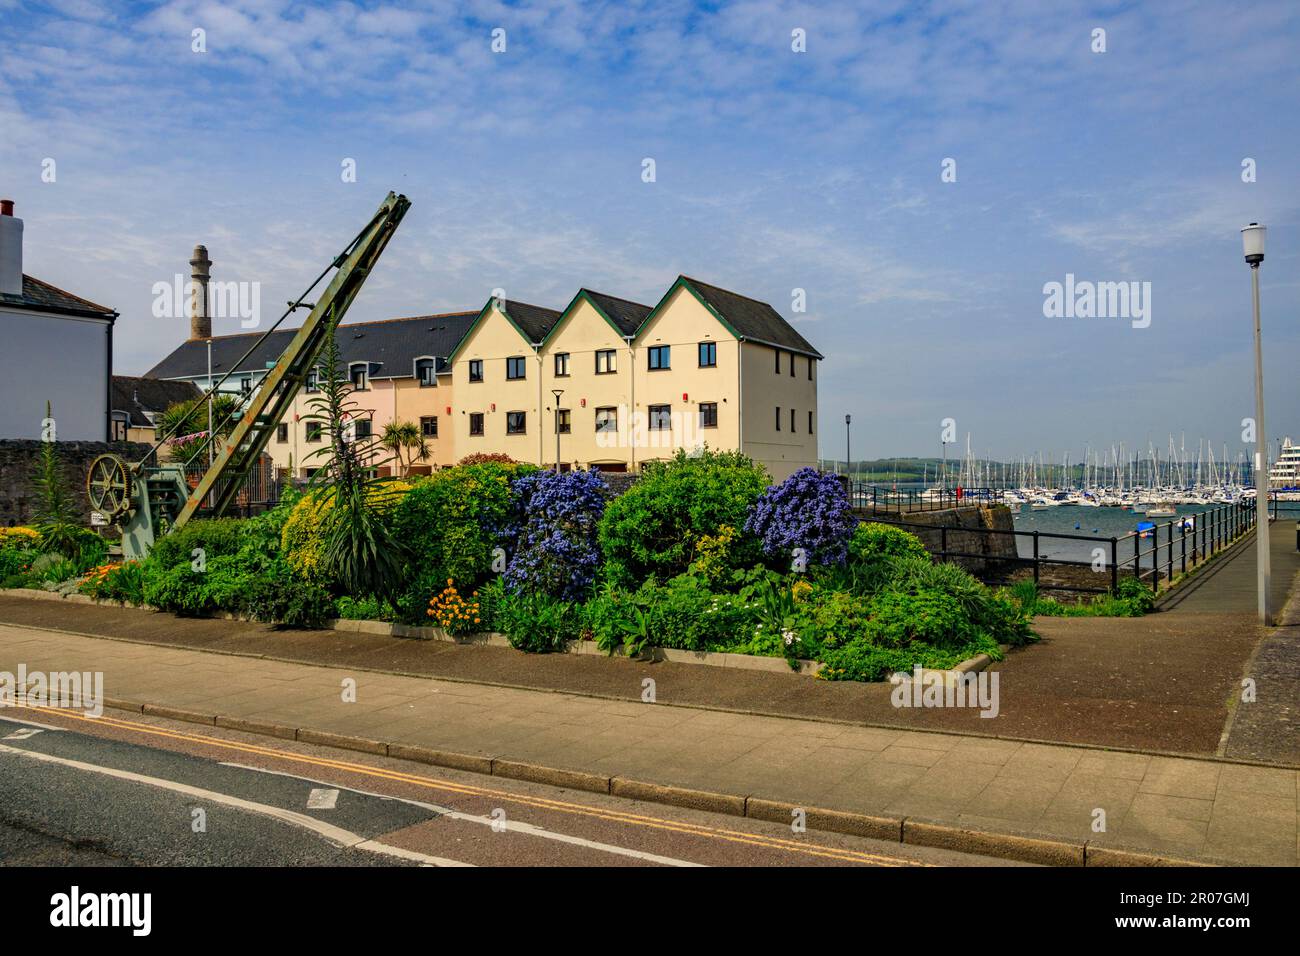 Colourful waterfront housing at Freeman's Wharf in Plymouth, Devon, England, UK Stock Photo